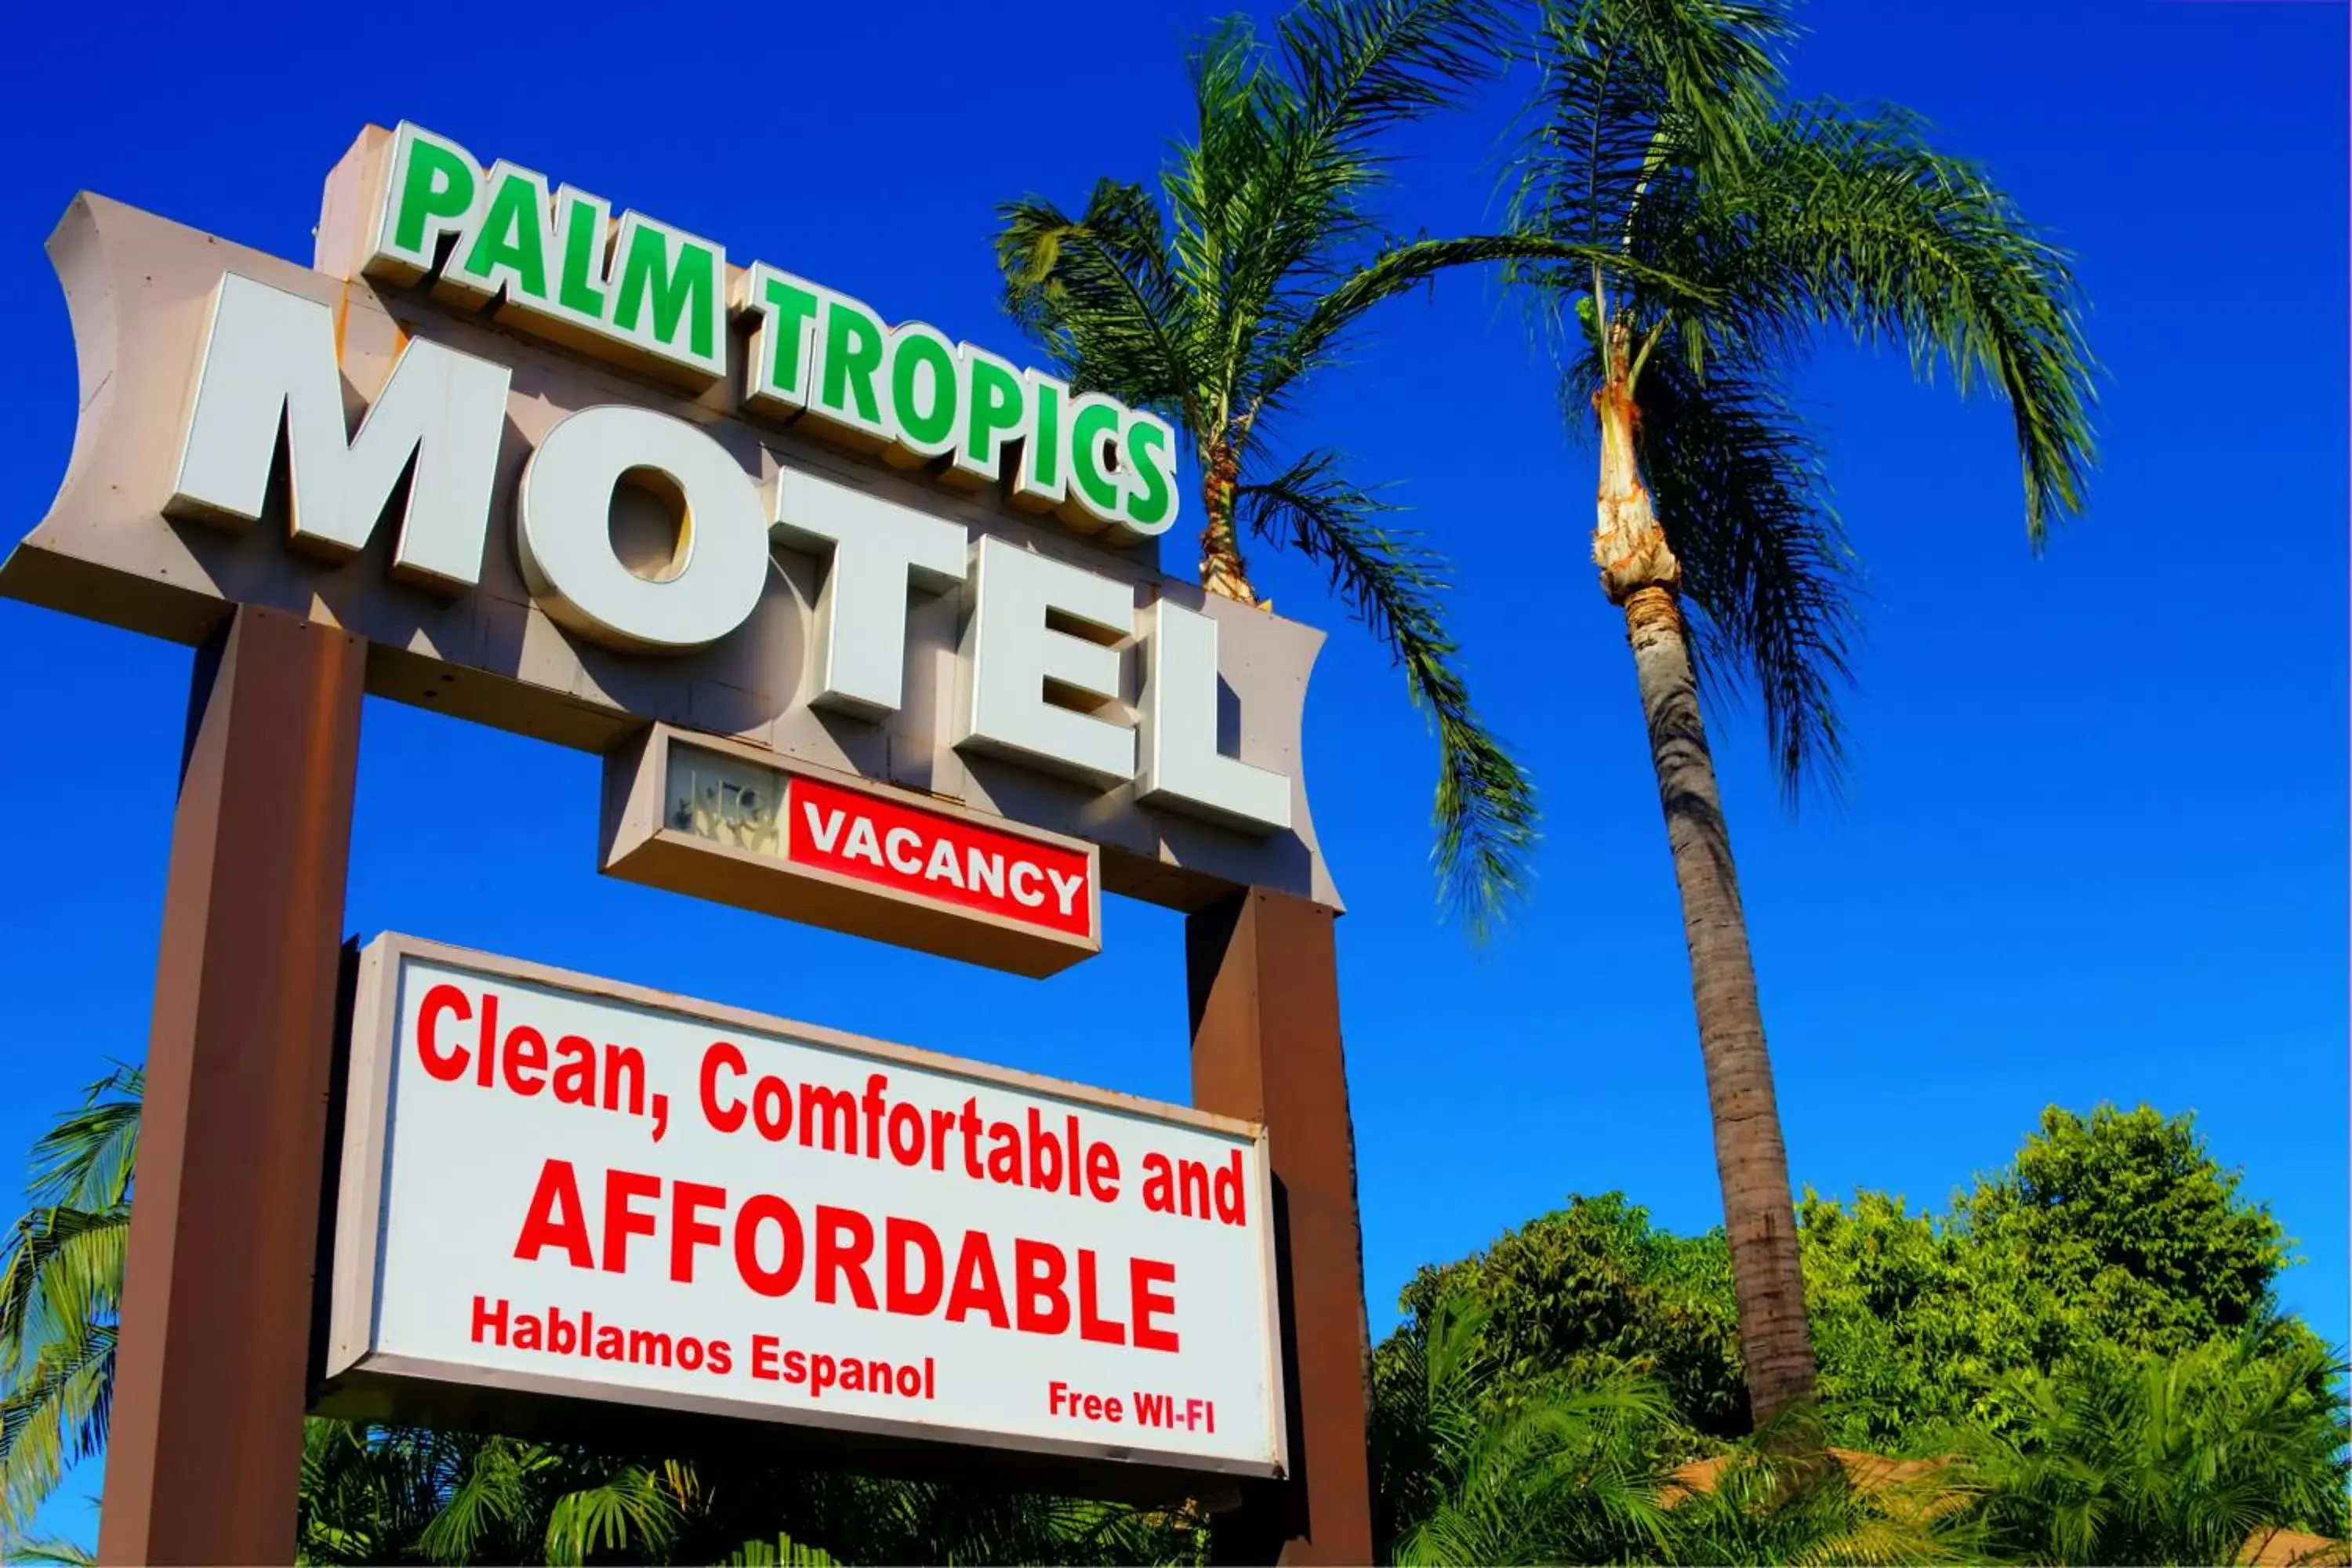 Property logo or sign in Palm Tropics Motel